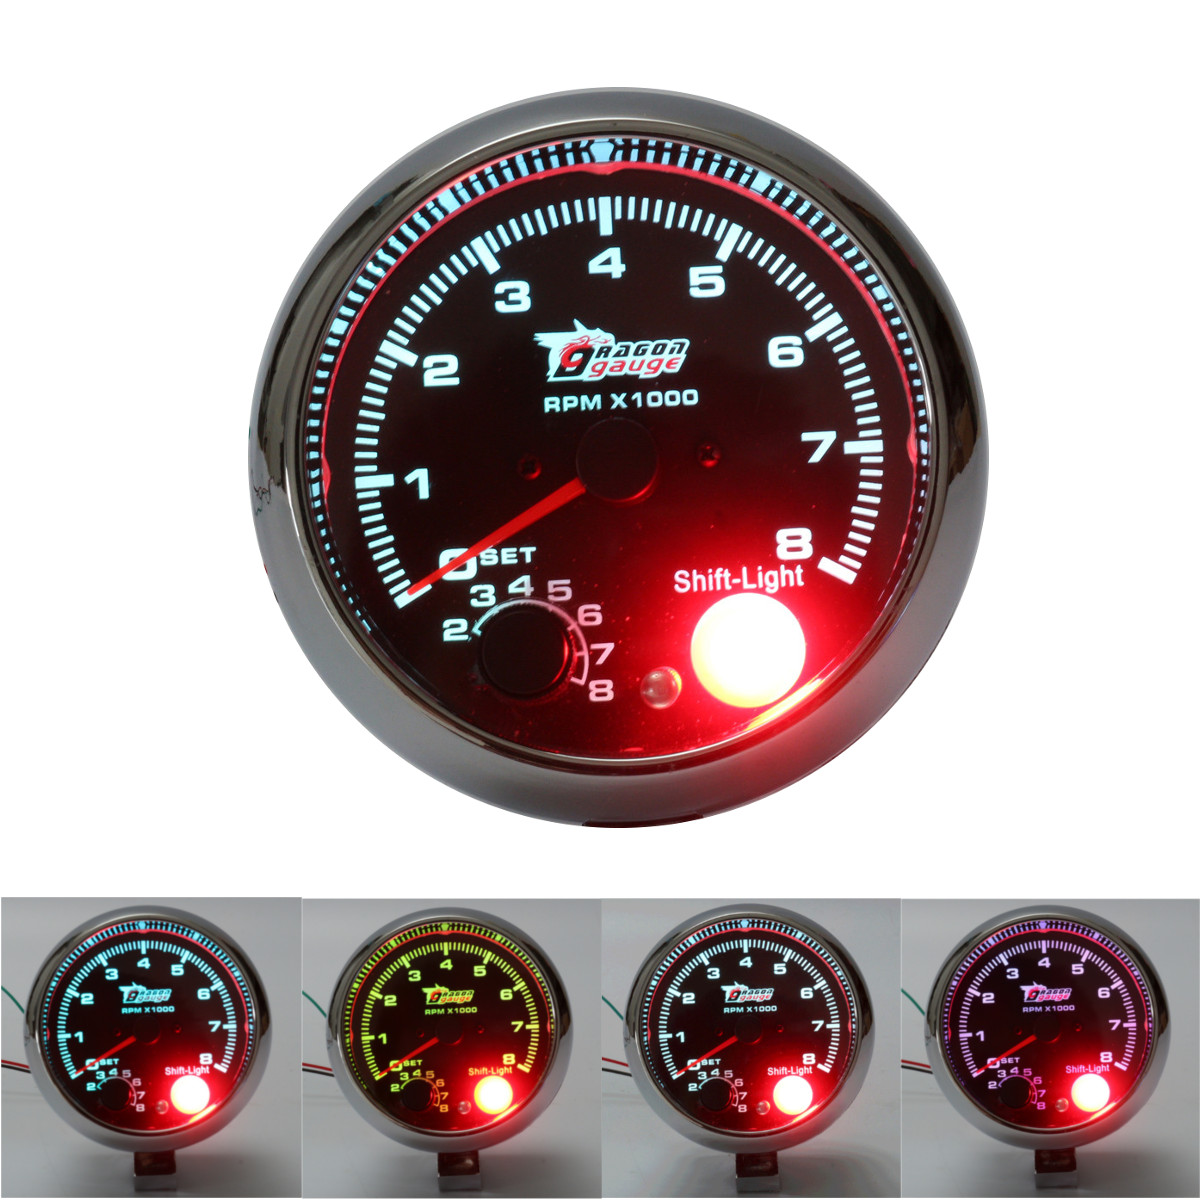 Find 3 75 Inch 12V RPMx1000 Tacho Tachometer with Shift Light RPM Rev Gauge Meter for Sale on Gipsybee.com with cryptocurrencies